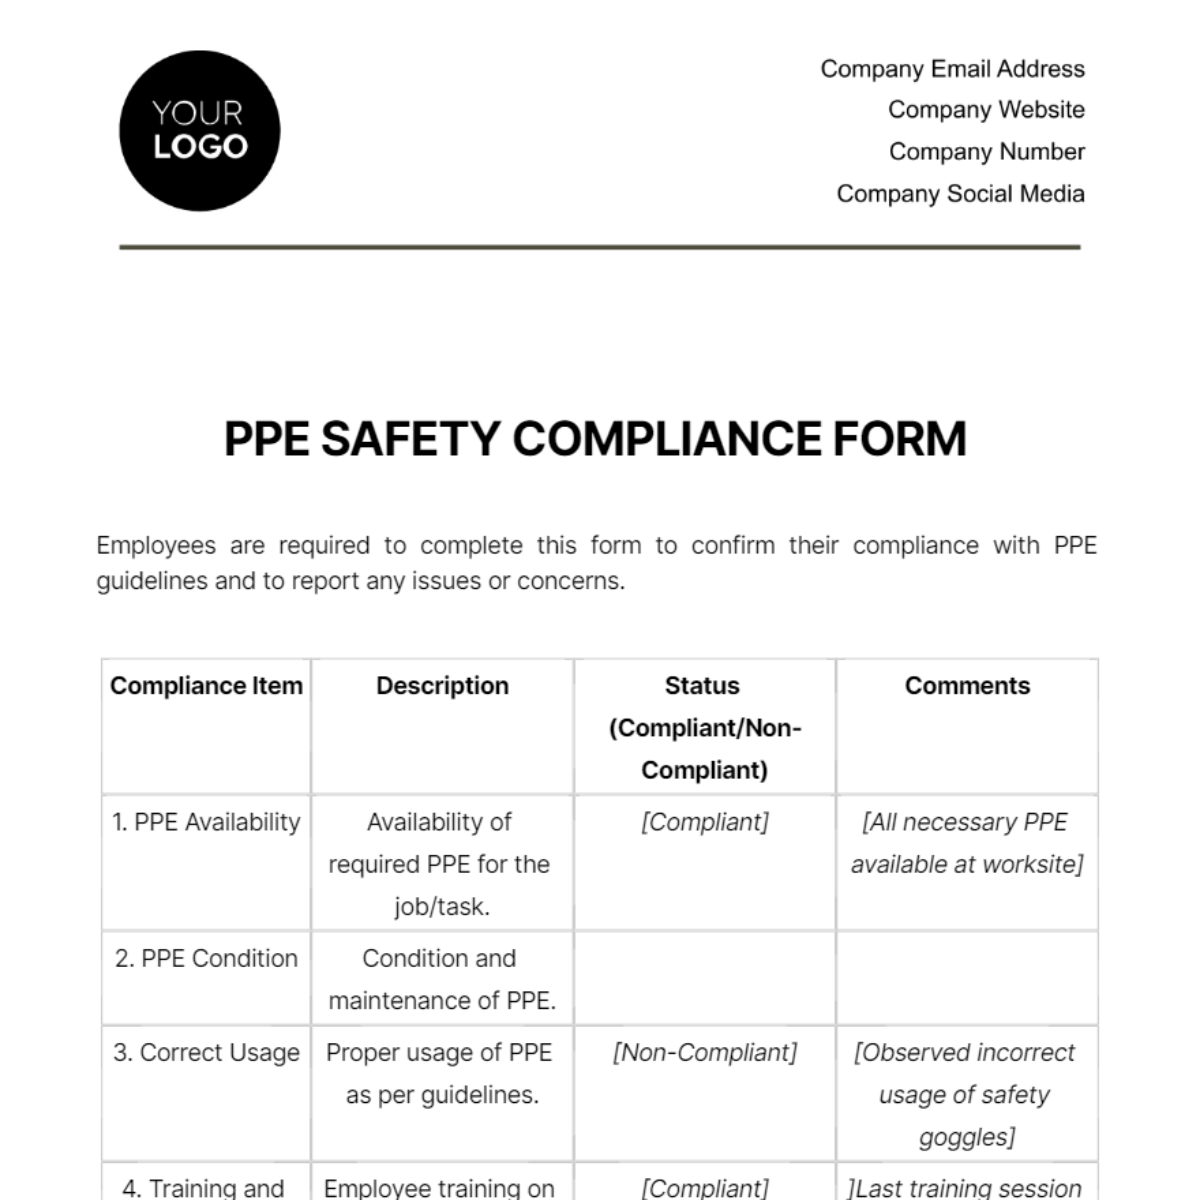 PPE Safety Compliance Form Template